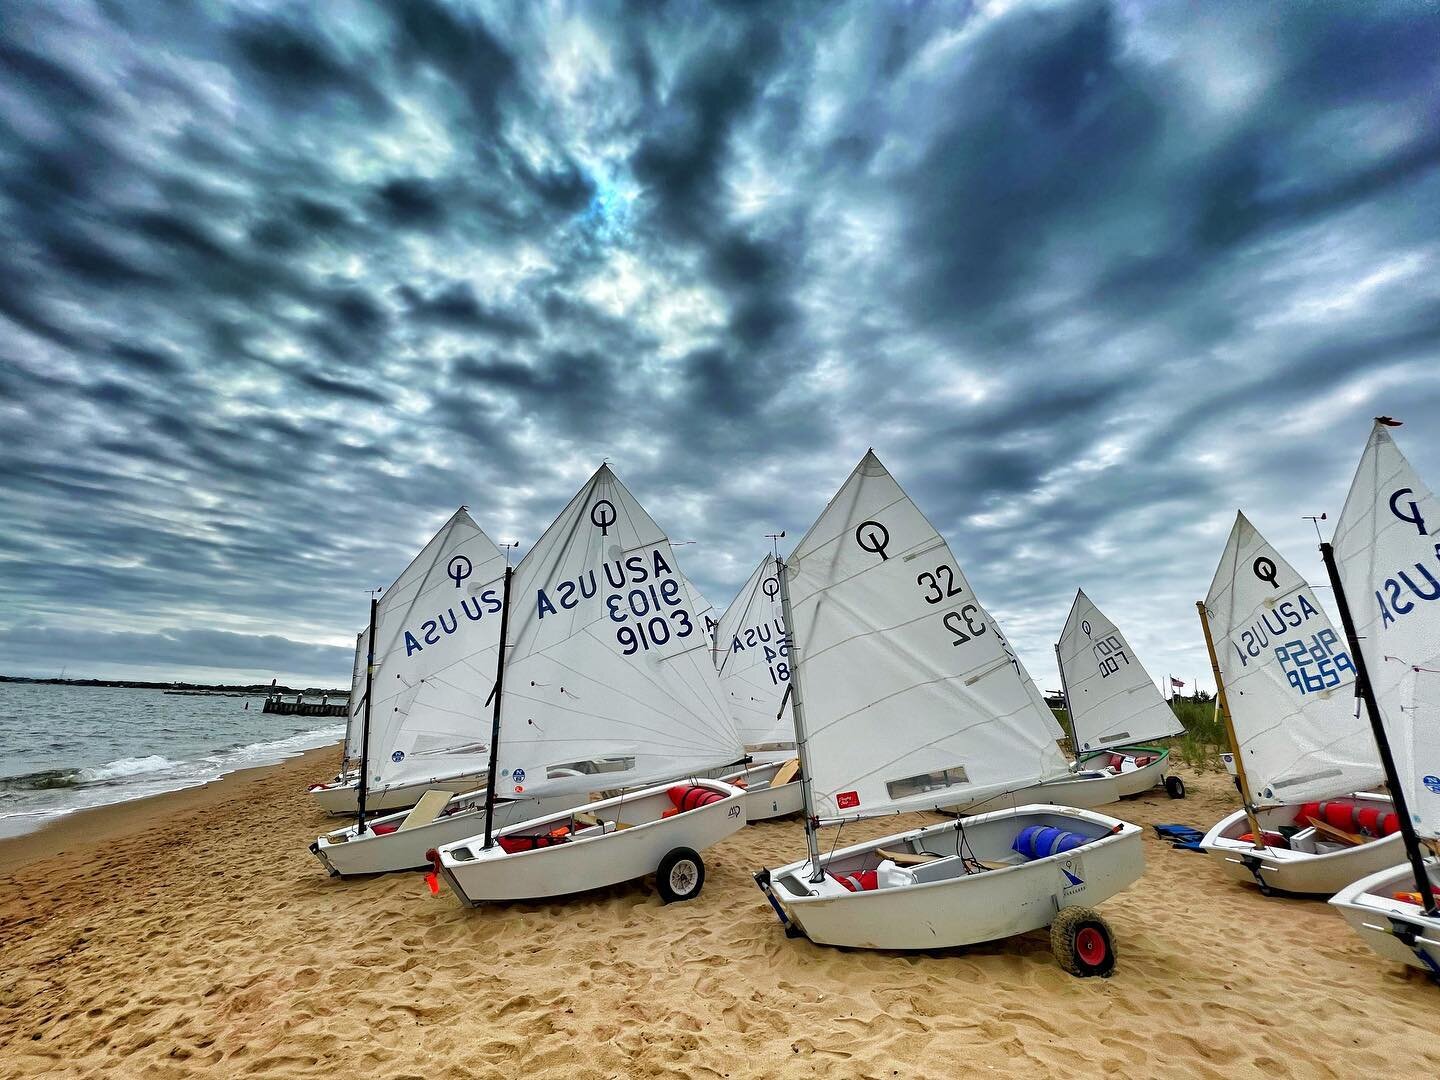 Up next&hellip; PGJSA regatta at Devon Yacht Club. All fleets same day and the last event of our summer series before the Champs at @southampton_yc #regatta #sail #youthsailing #hamptons